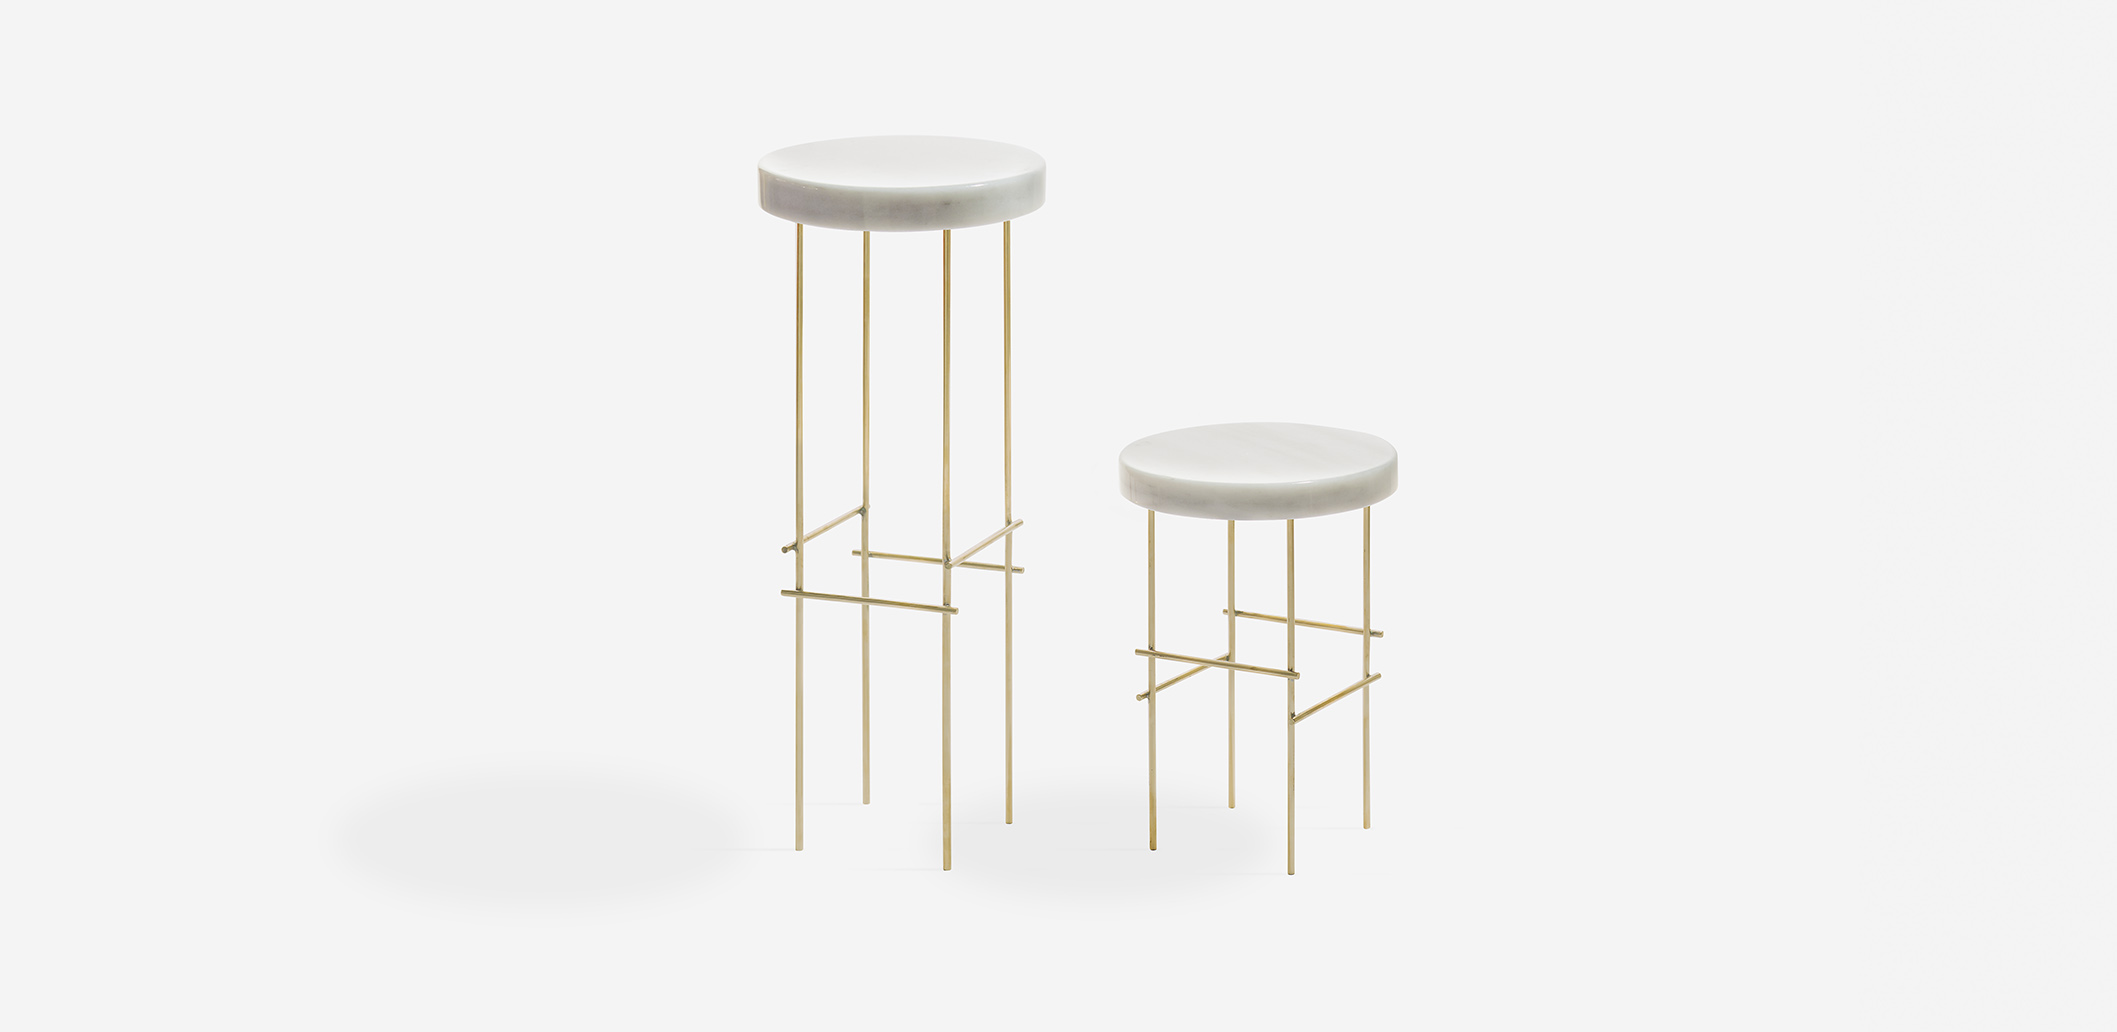 Marblelous Pedestal Brass MRBL116B Side table. Diameter: 30cm. Height: 44cm. For lovers of singularity: a pedestal to expose the thing you love most. The Marblelous Pedestal uses minimalist design to valorize nobles materials, adding style and elegance to your home.